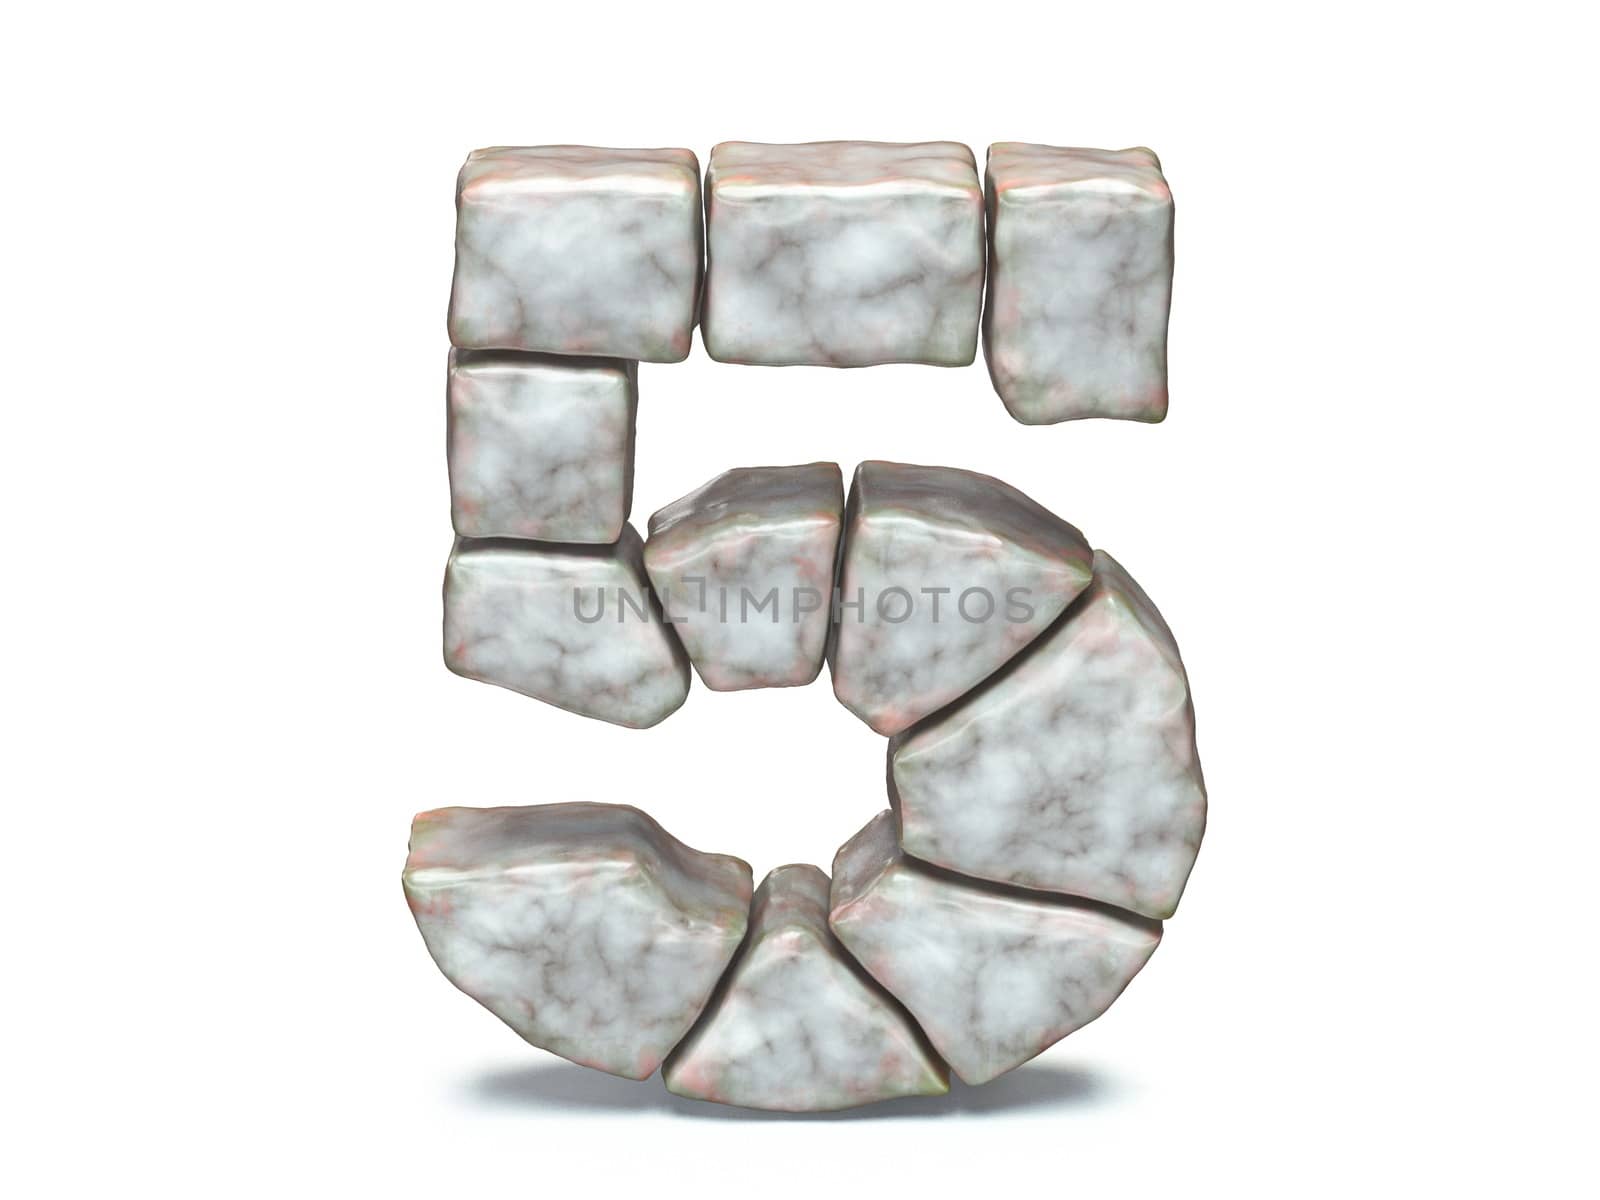 Rock masonry font Number 5 FIVE 3D render illustration isolated on white background